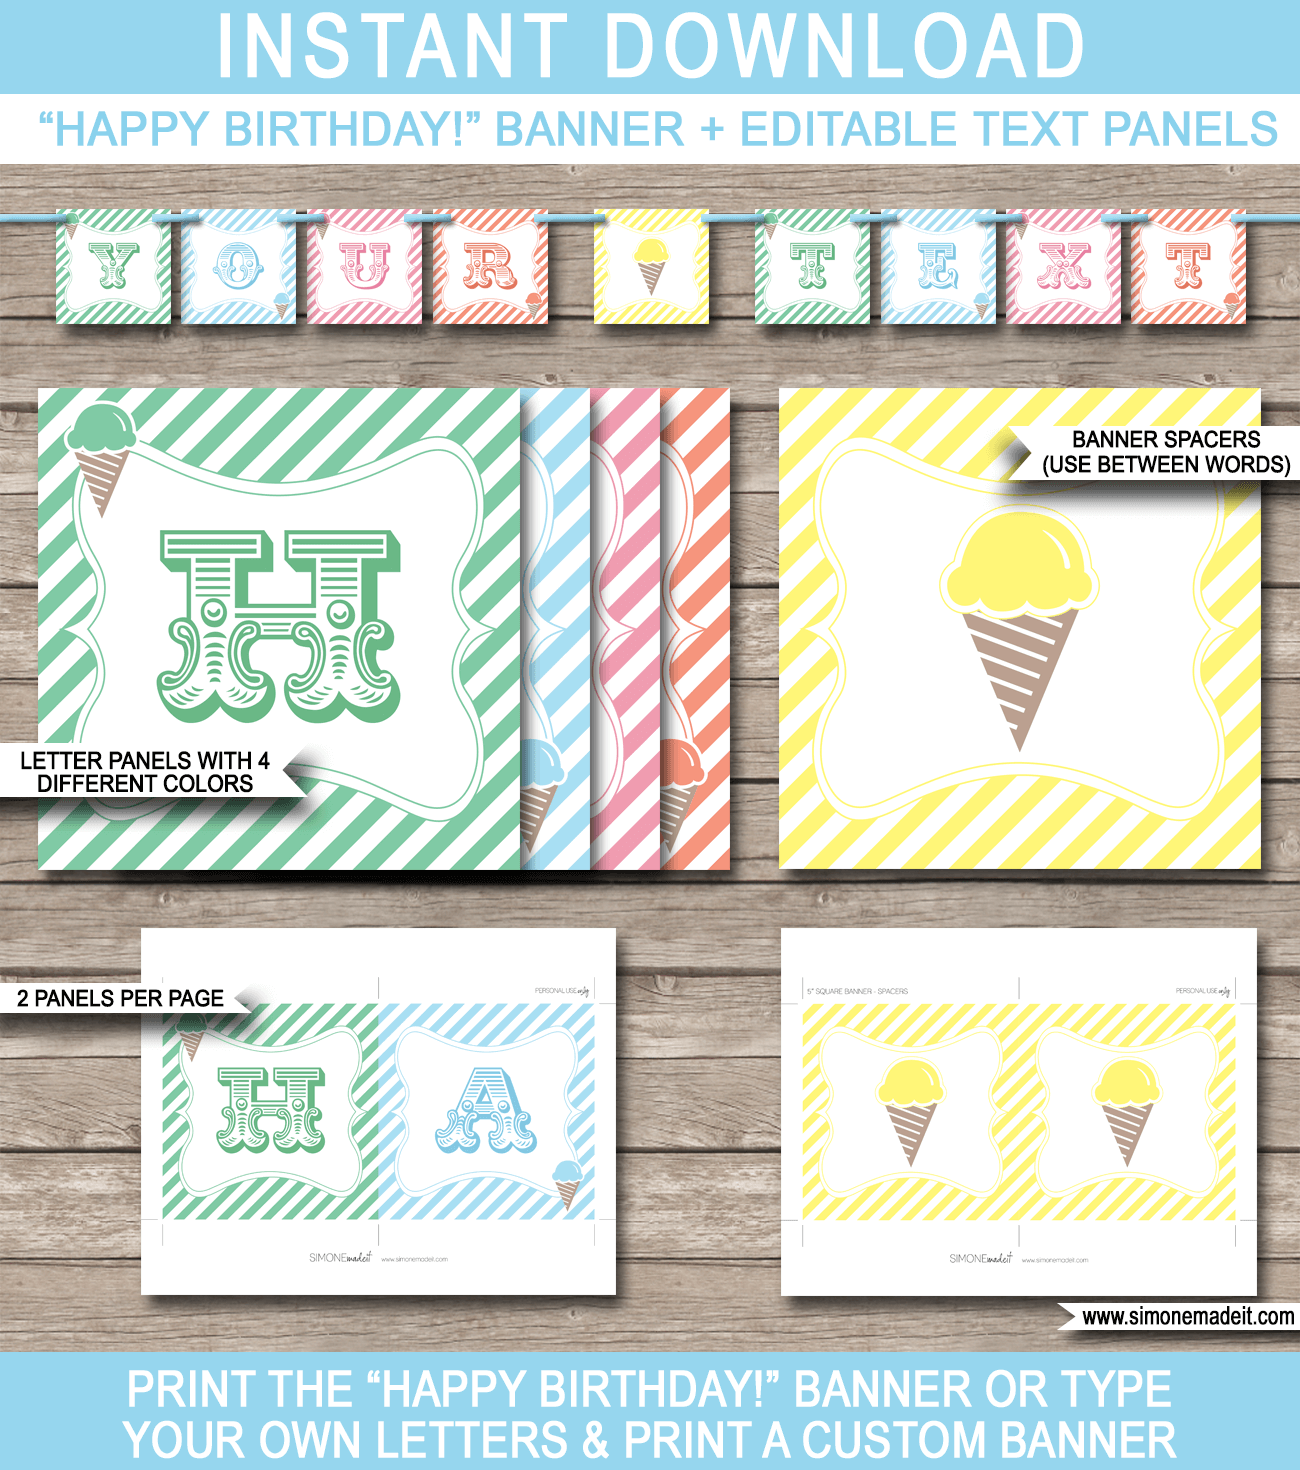 Ice Cream Party Banner Template - Ice Cream Bunting - Happy Birthday Banner - Birthday Party - Ice Cream Social - Editable and Printable DIY Template - INSTANT DOWNLOAD $4.50 via simonemadeit.com